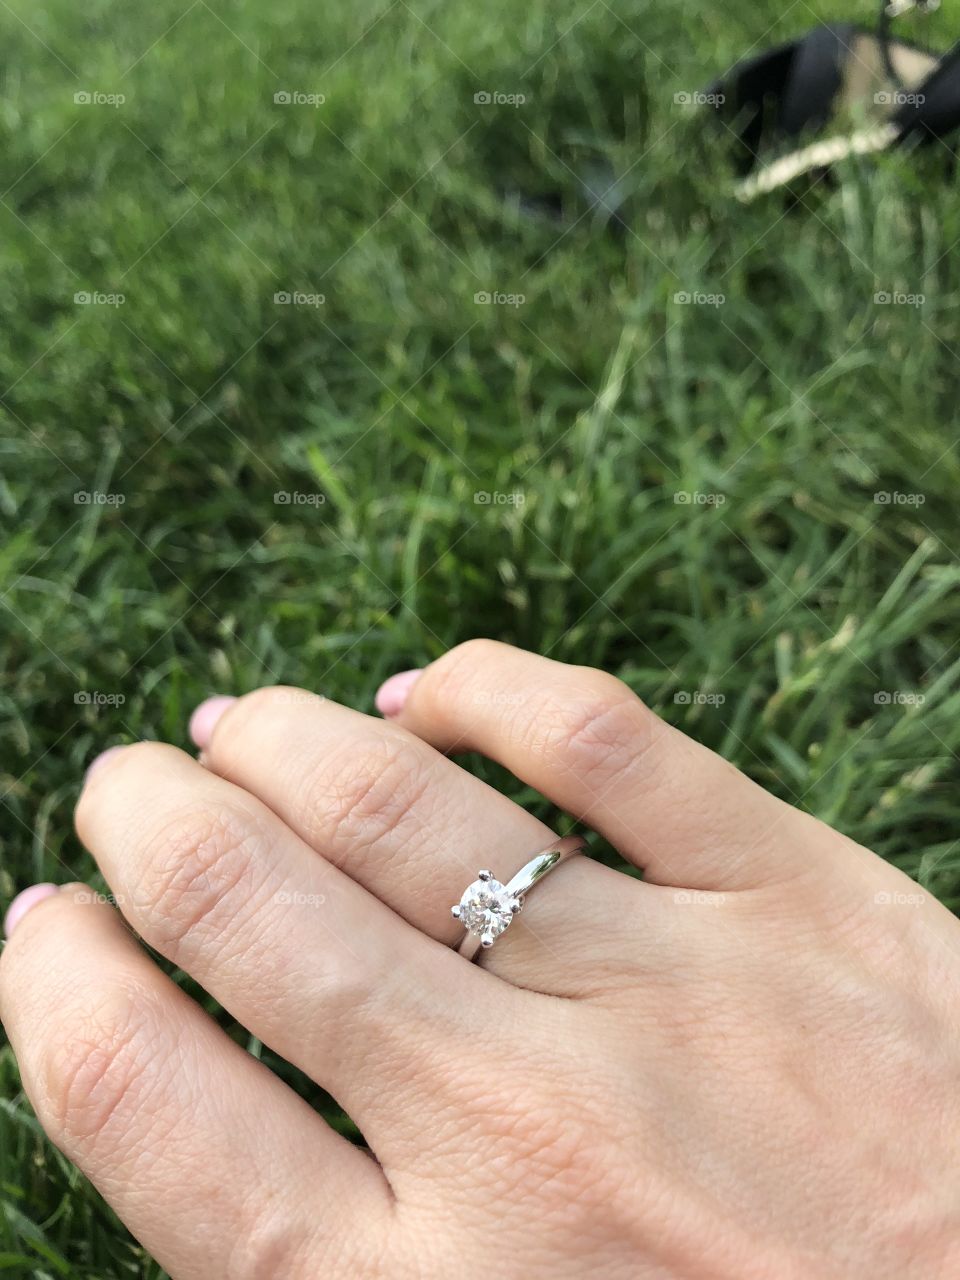 Proposal ring with diamond on a hand of young woman 